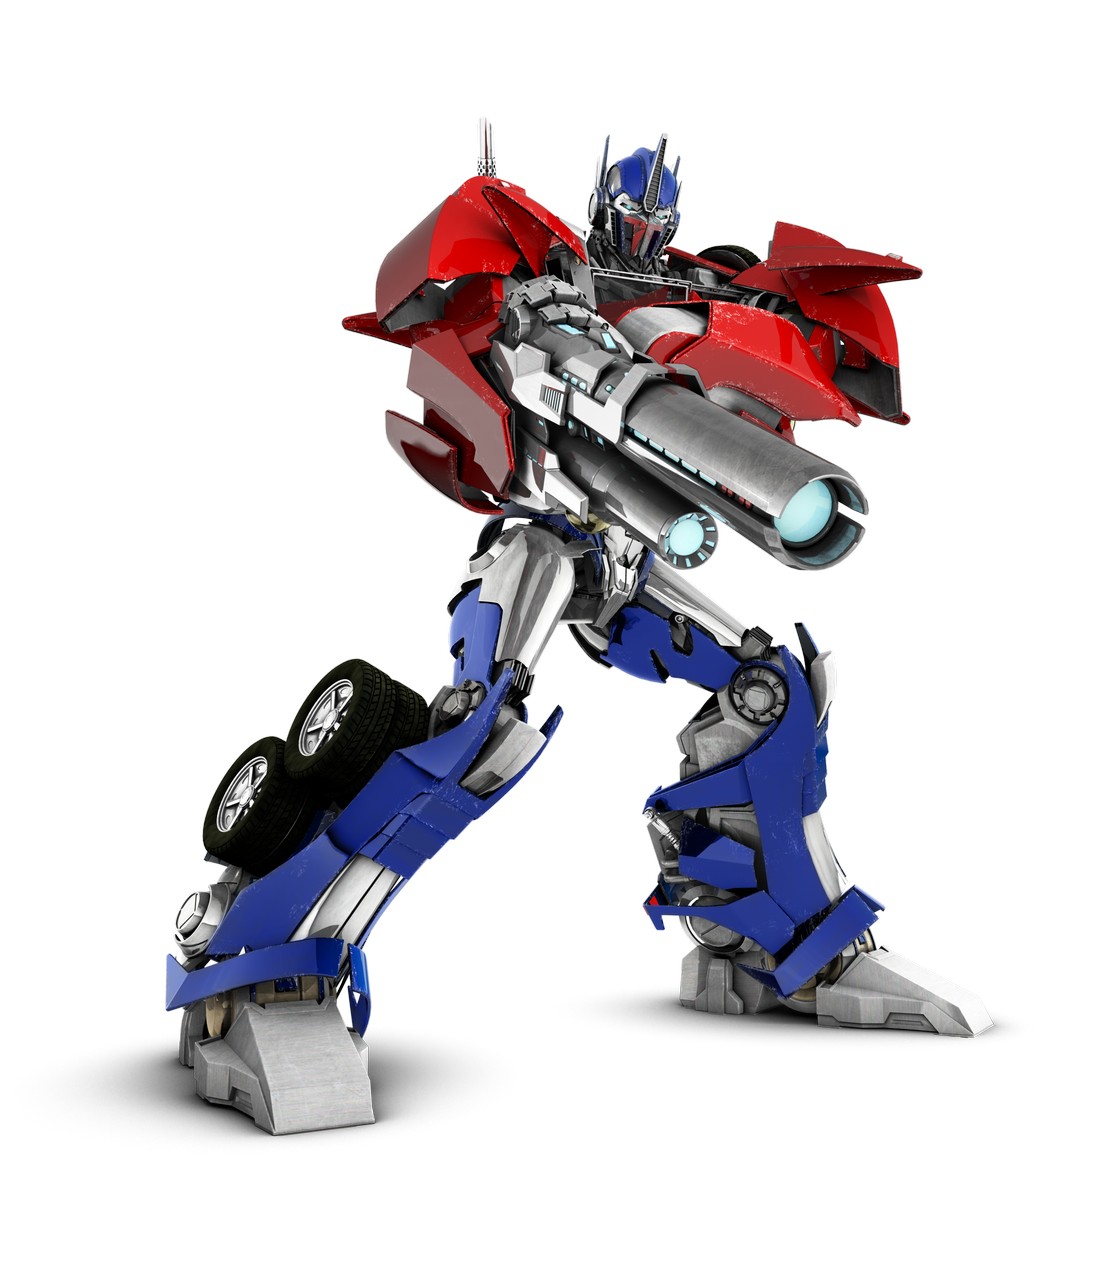 Transformers clipart 2 » Clipart Station.